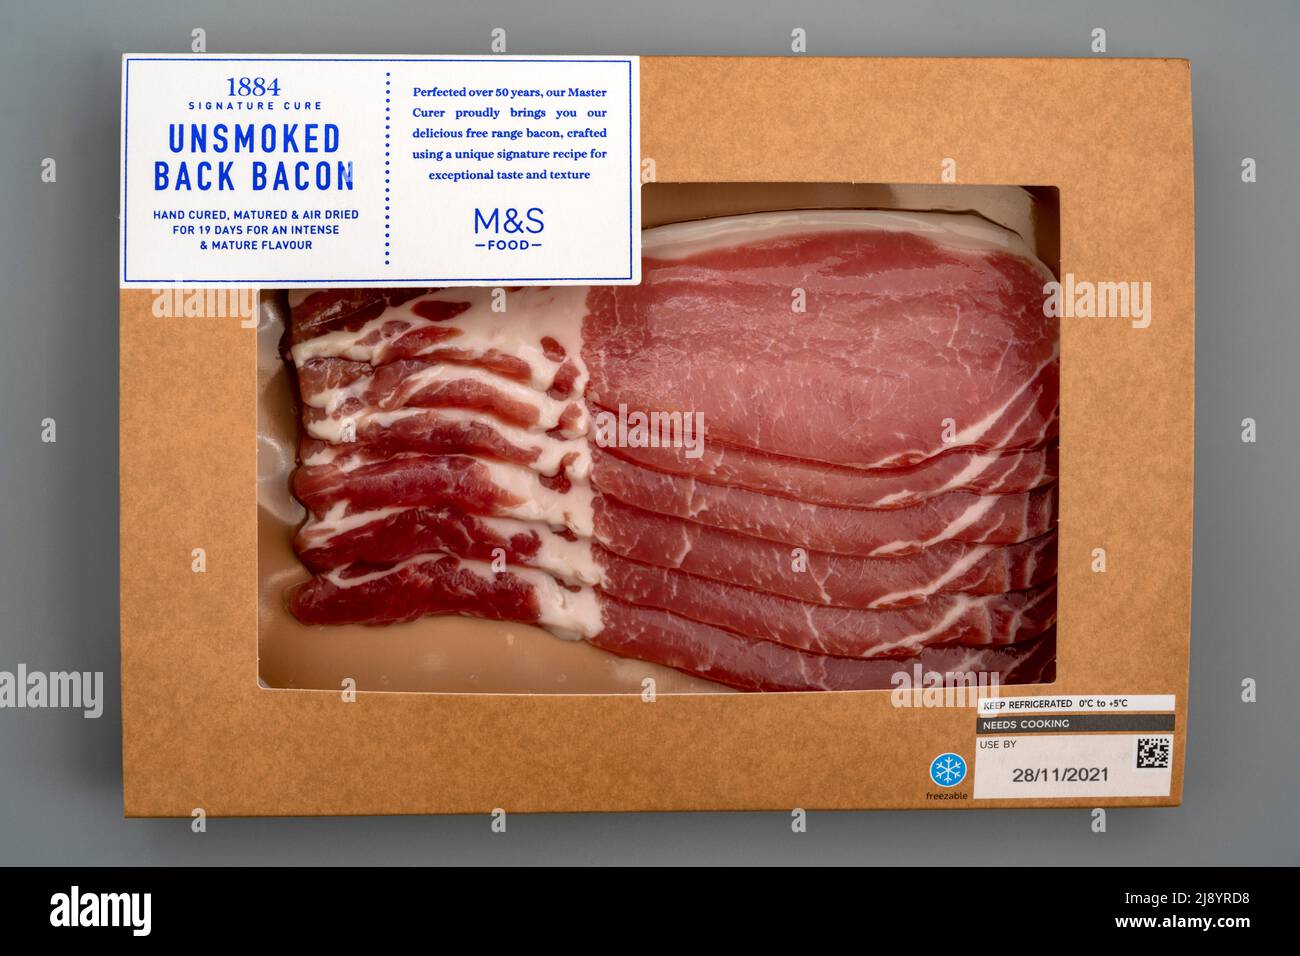 M&S unsmoked back bacon Stock Photo